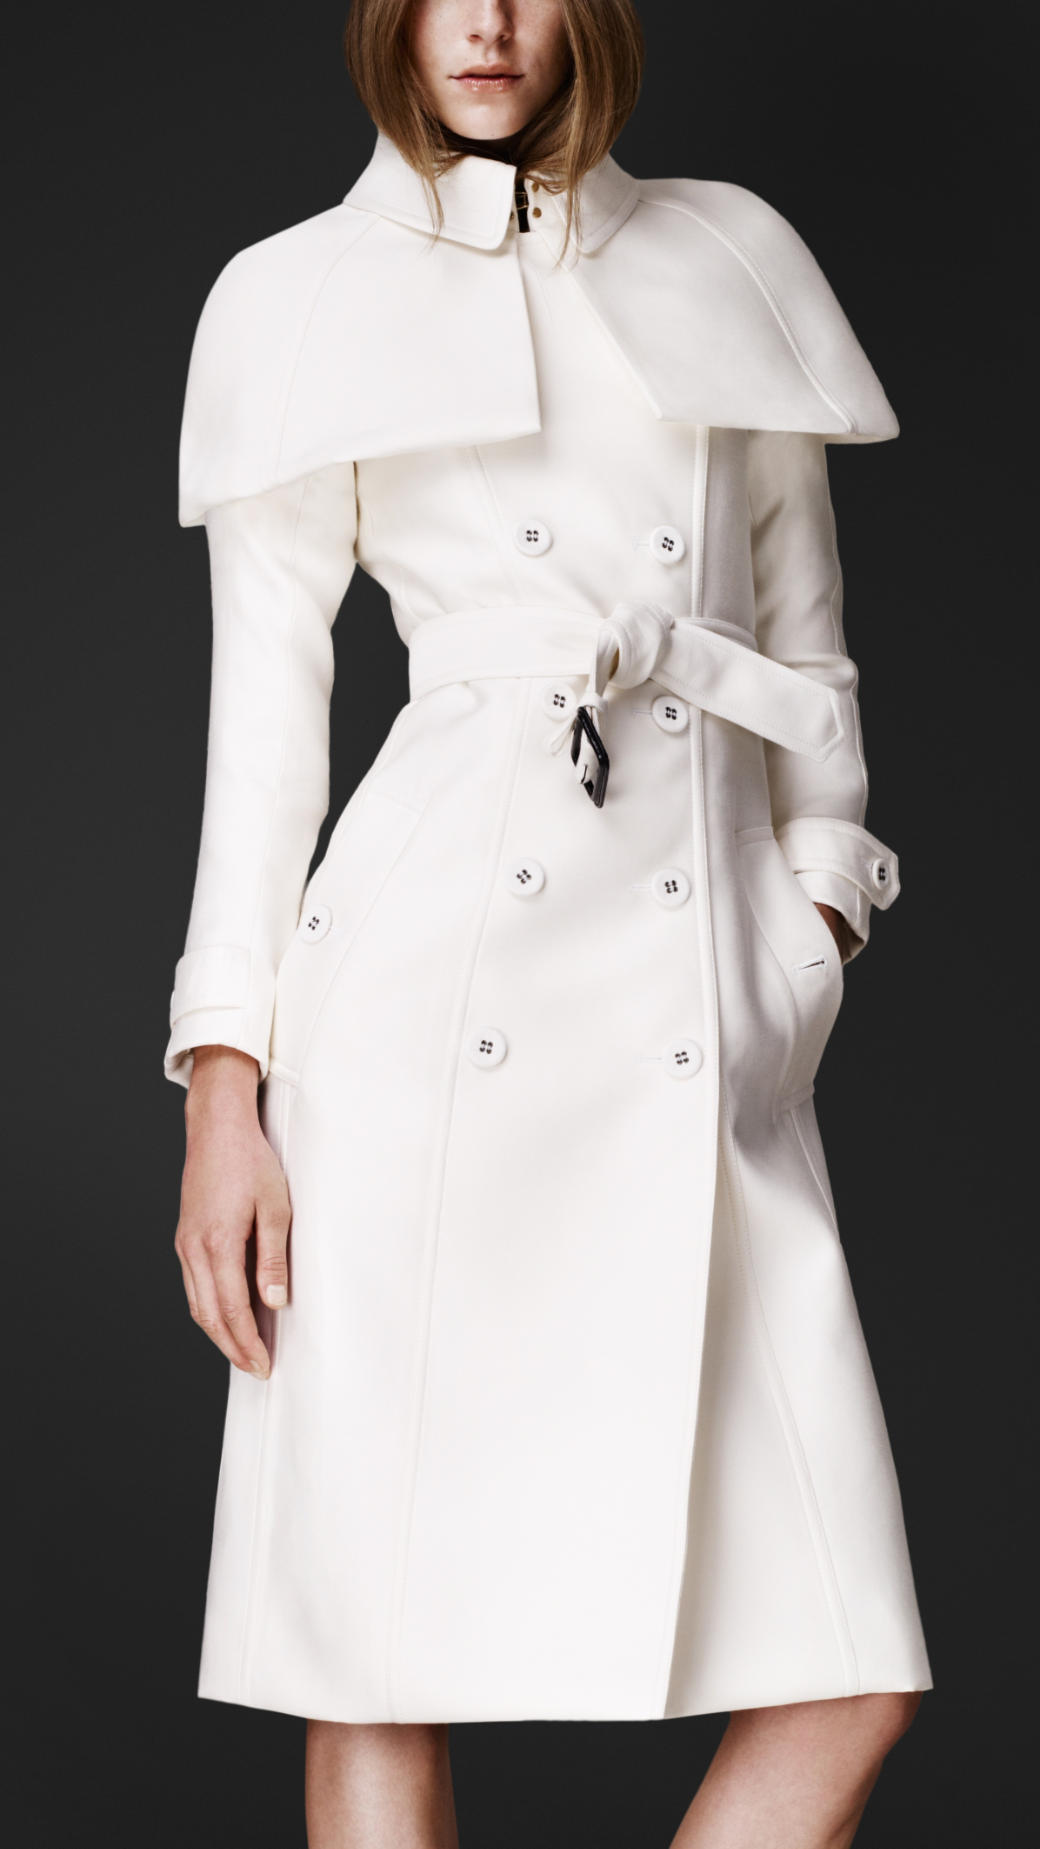 Burberry Prorsum Double Duchess Caped Trench Coat in White | Lyst